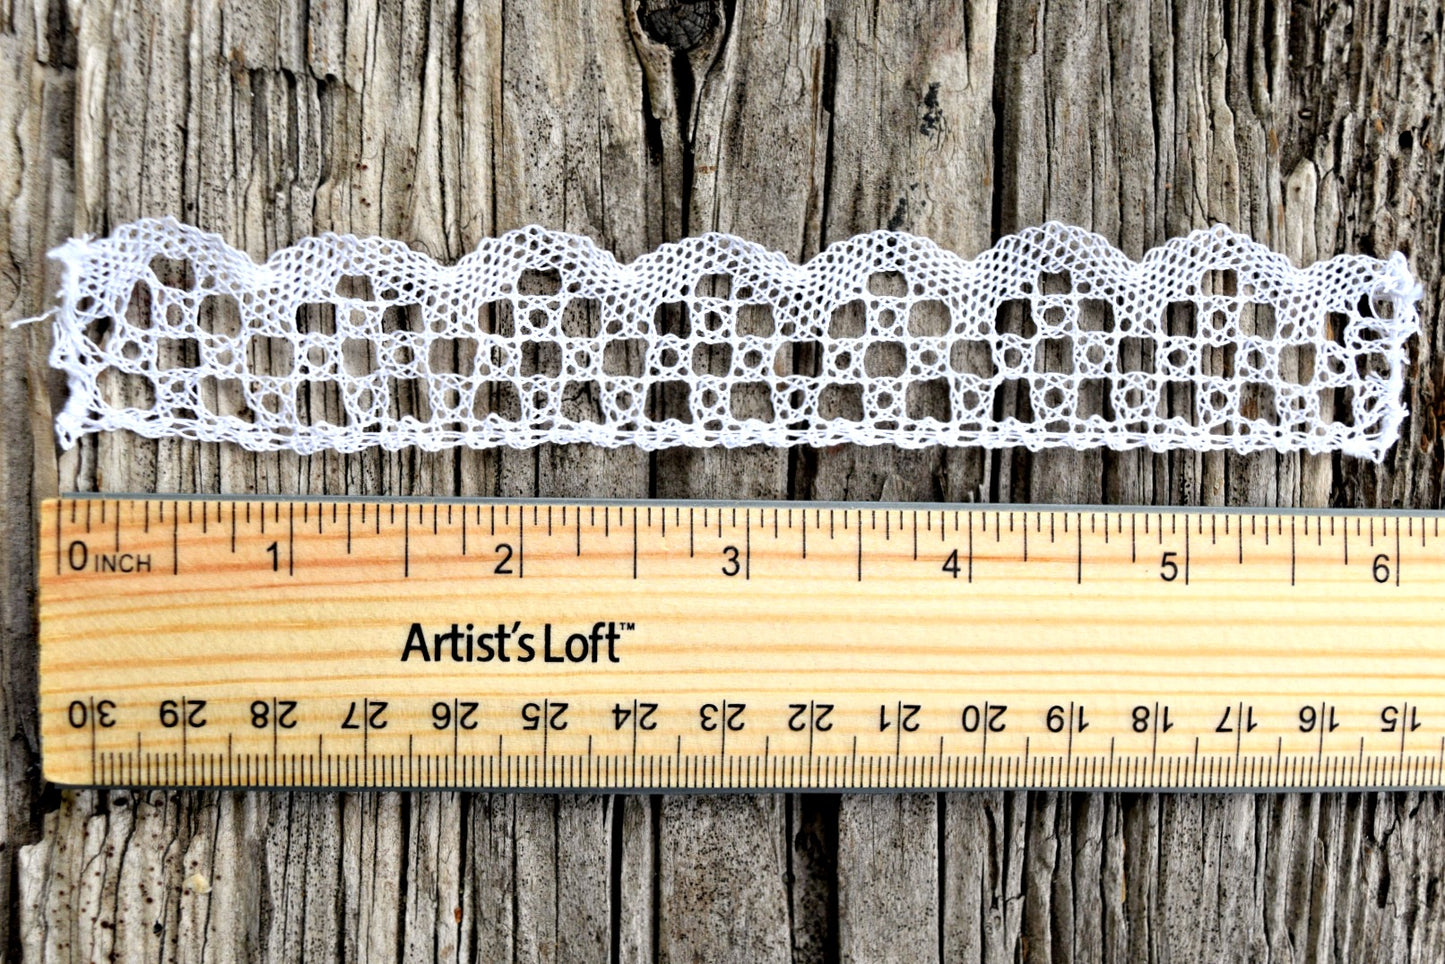 Handmade Bobbin Lace by the Foot - Rose Tiles